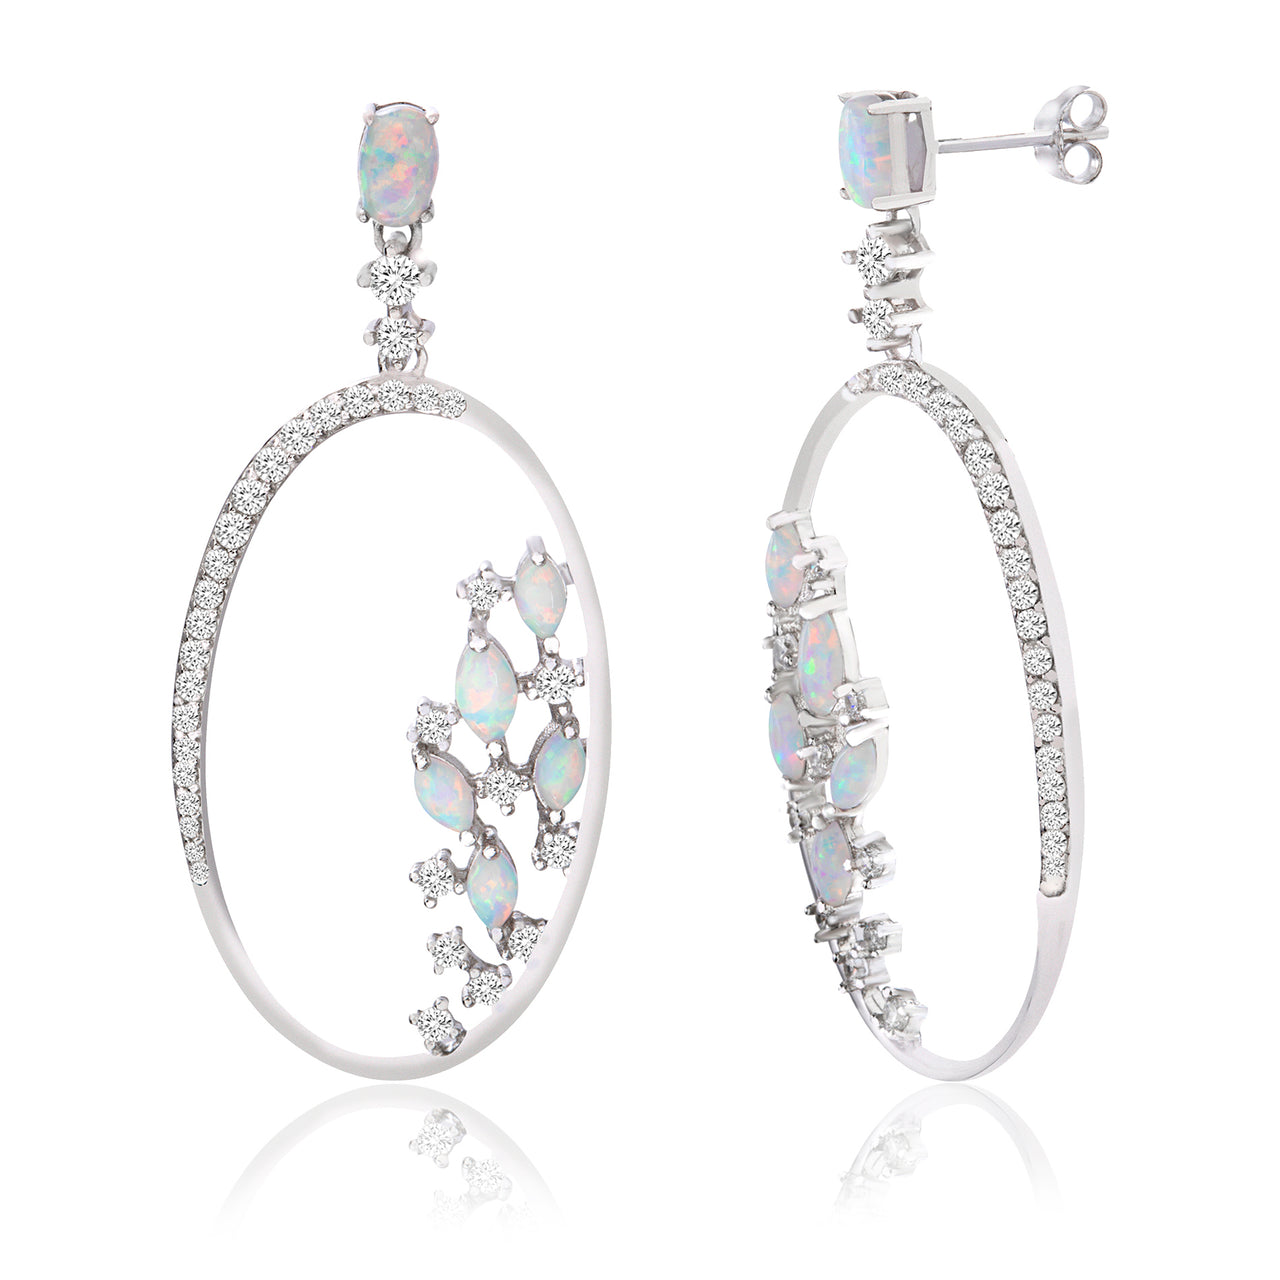 Lesa Michele Lab-Created Opal & Cubic Zirconia Drop Earring in Rhodium Plated Sterling Silver